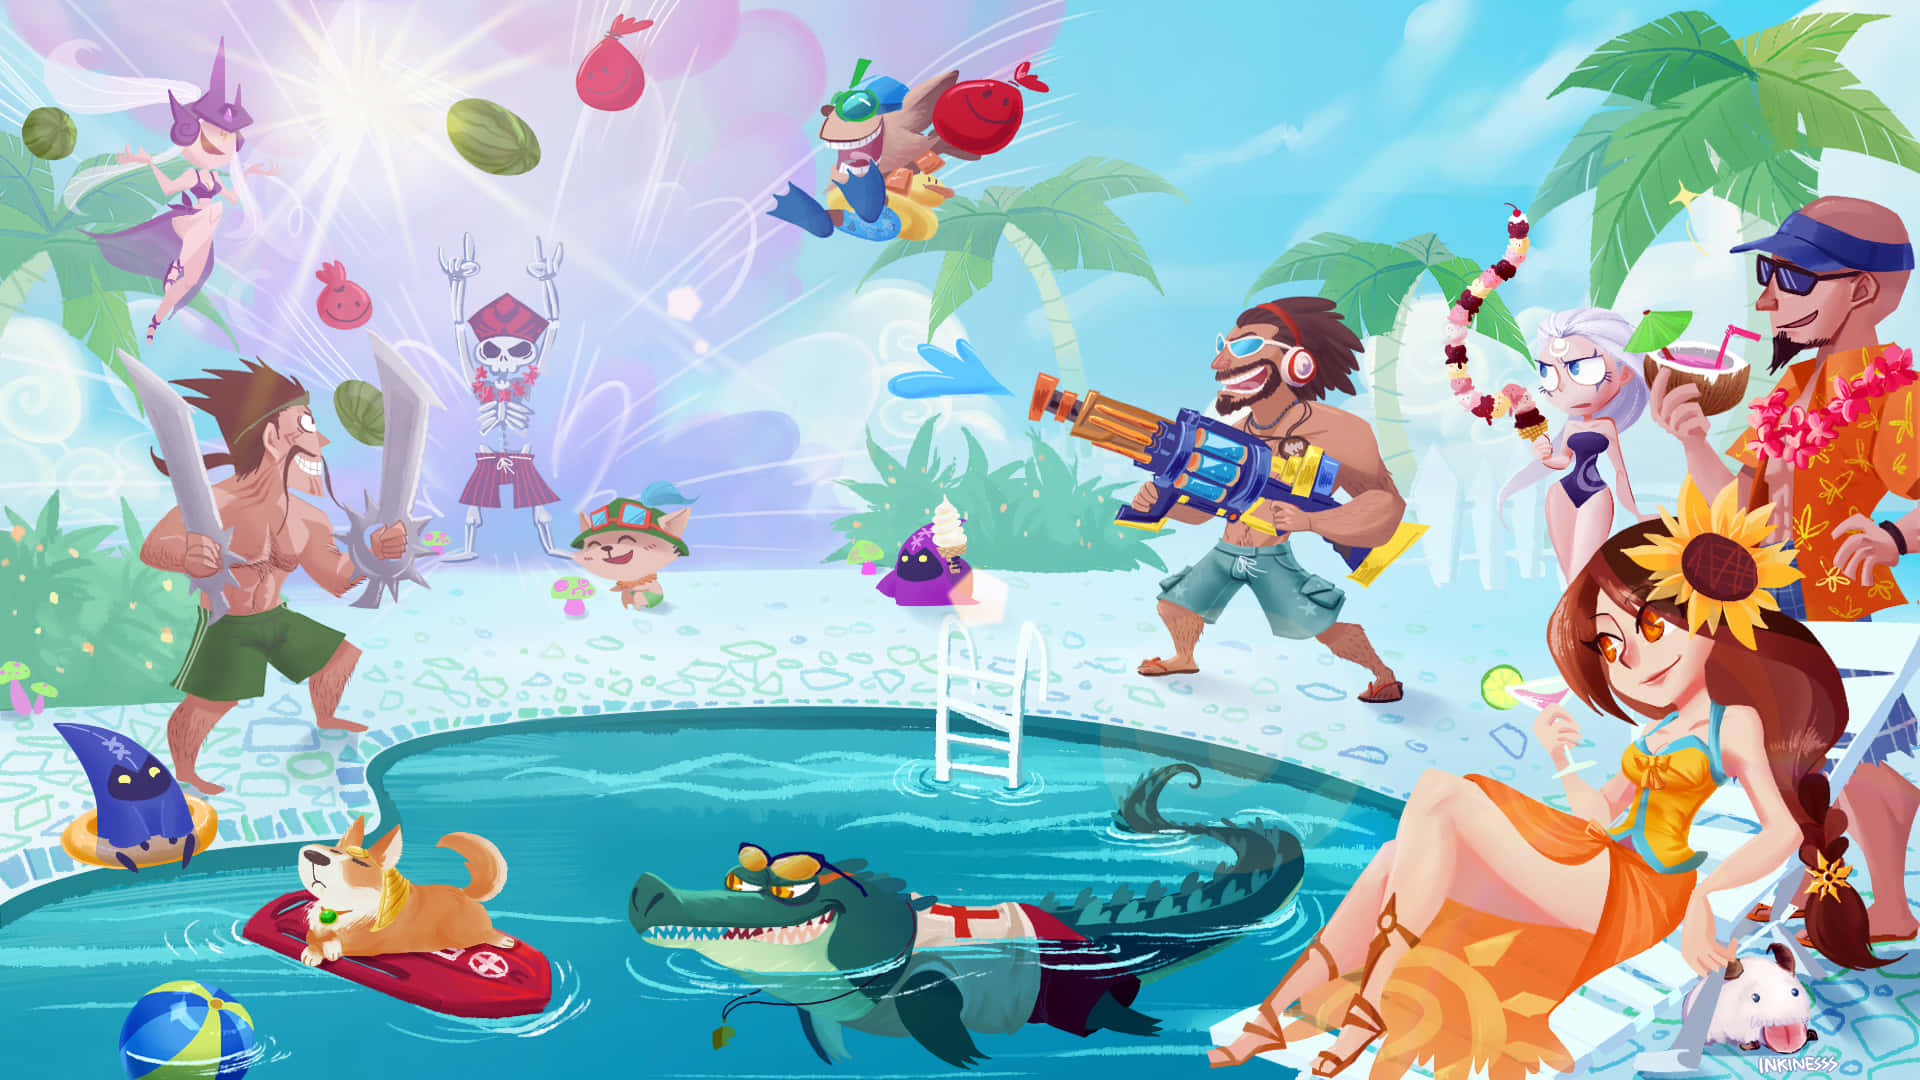 "Make a splash and throw the ultimate pool party!"